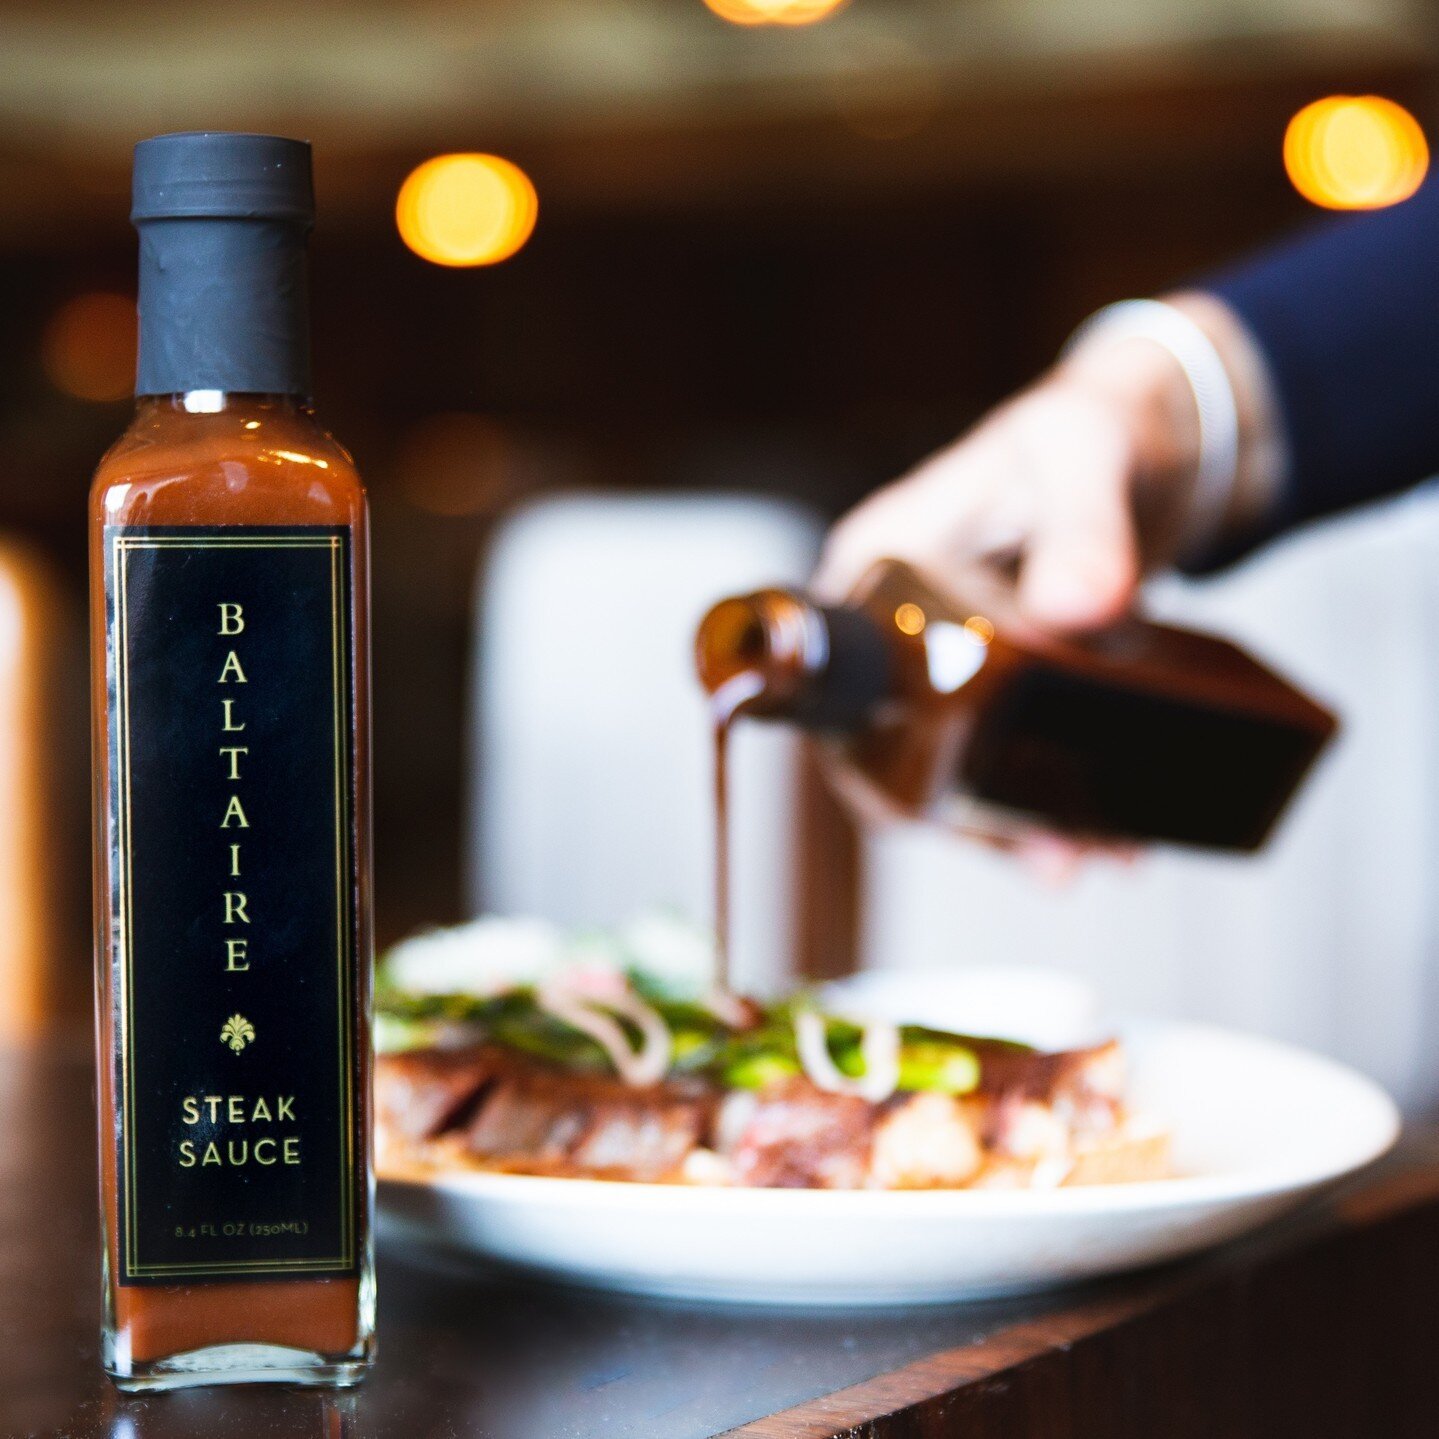 BBQ season is around the corner! Baltaire's signature steak sauce features classic roots, bold flavors, and savory complexity. ⁠
⁠
With umami-rich flavors, a tad of sweetness, a little pepper, and a bit of tartness, our unique steak sauce makes a per